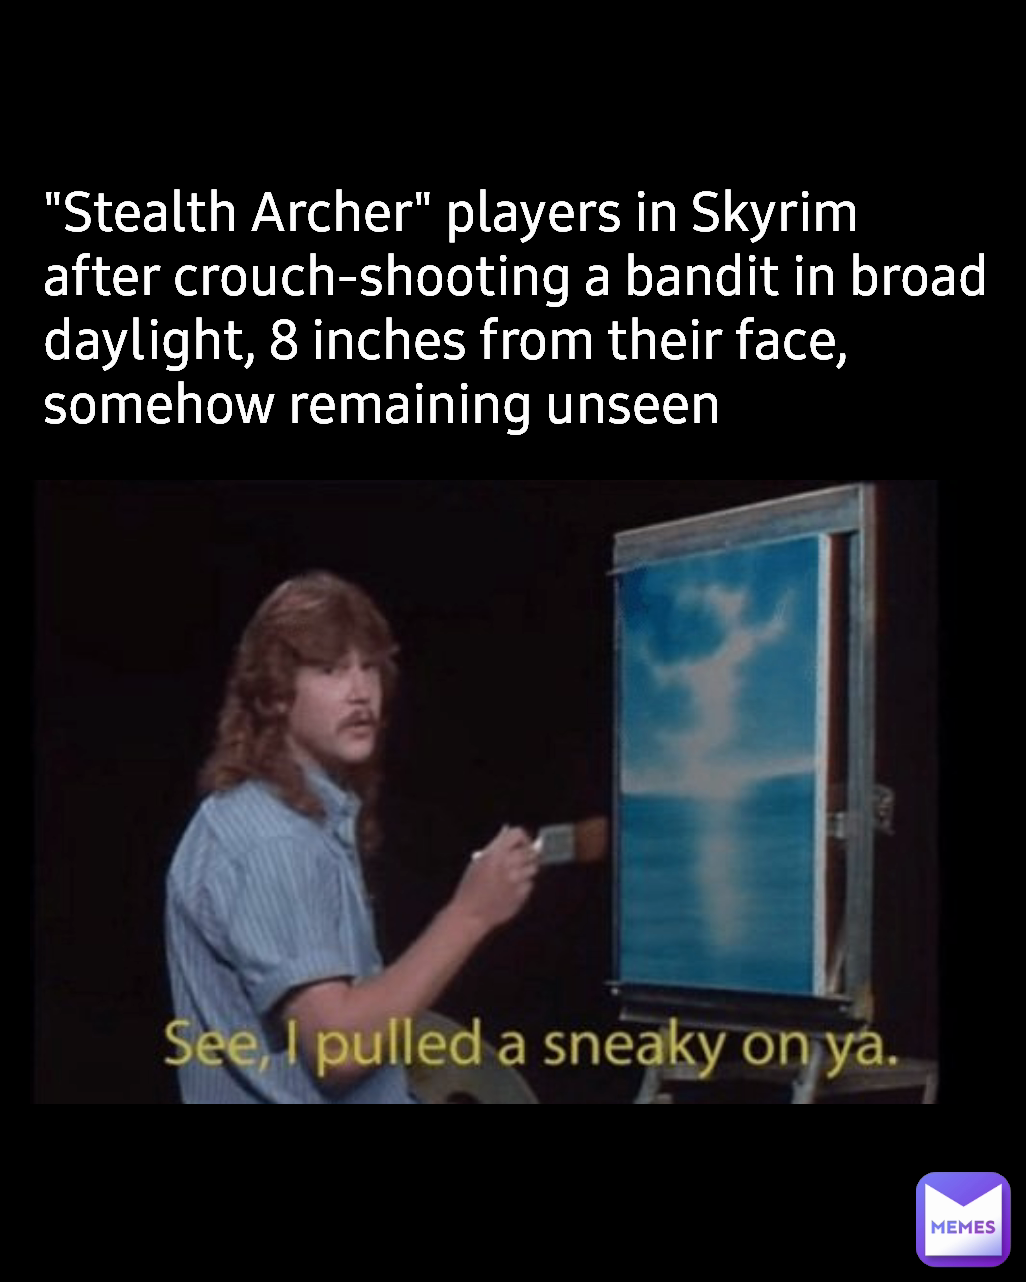 "Stealth Archer" players in Skyrim after crouch-shooting a bandit in broad daylight, 8 inches from their face, somehow remaining unseen 